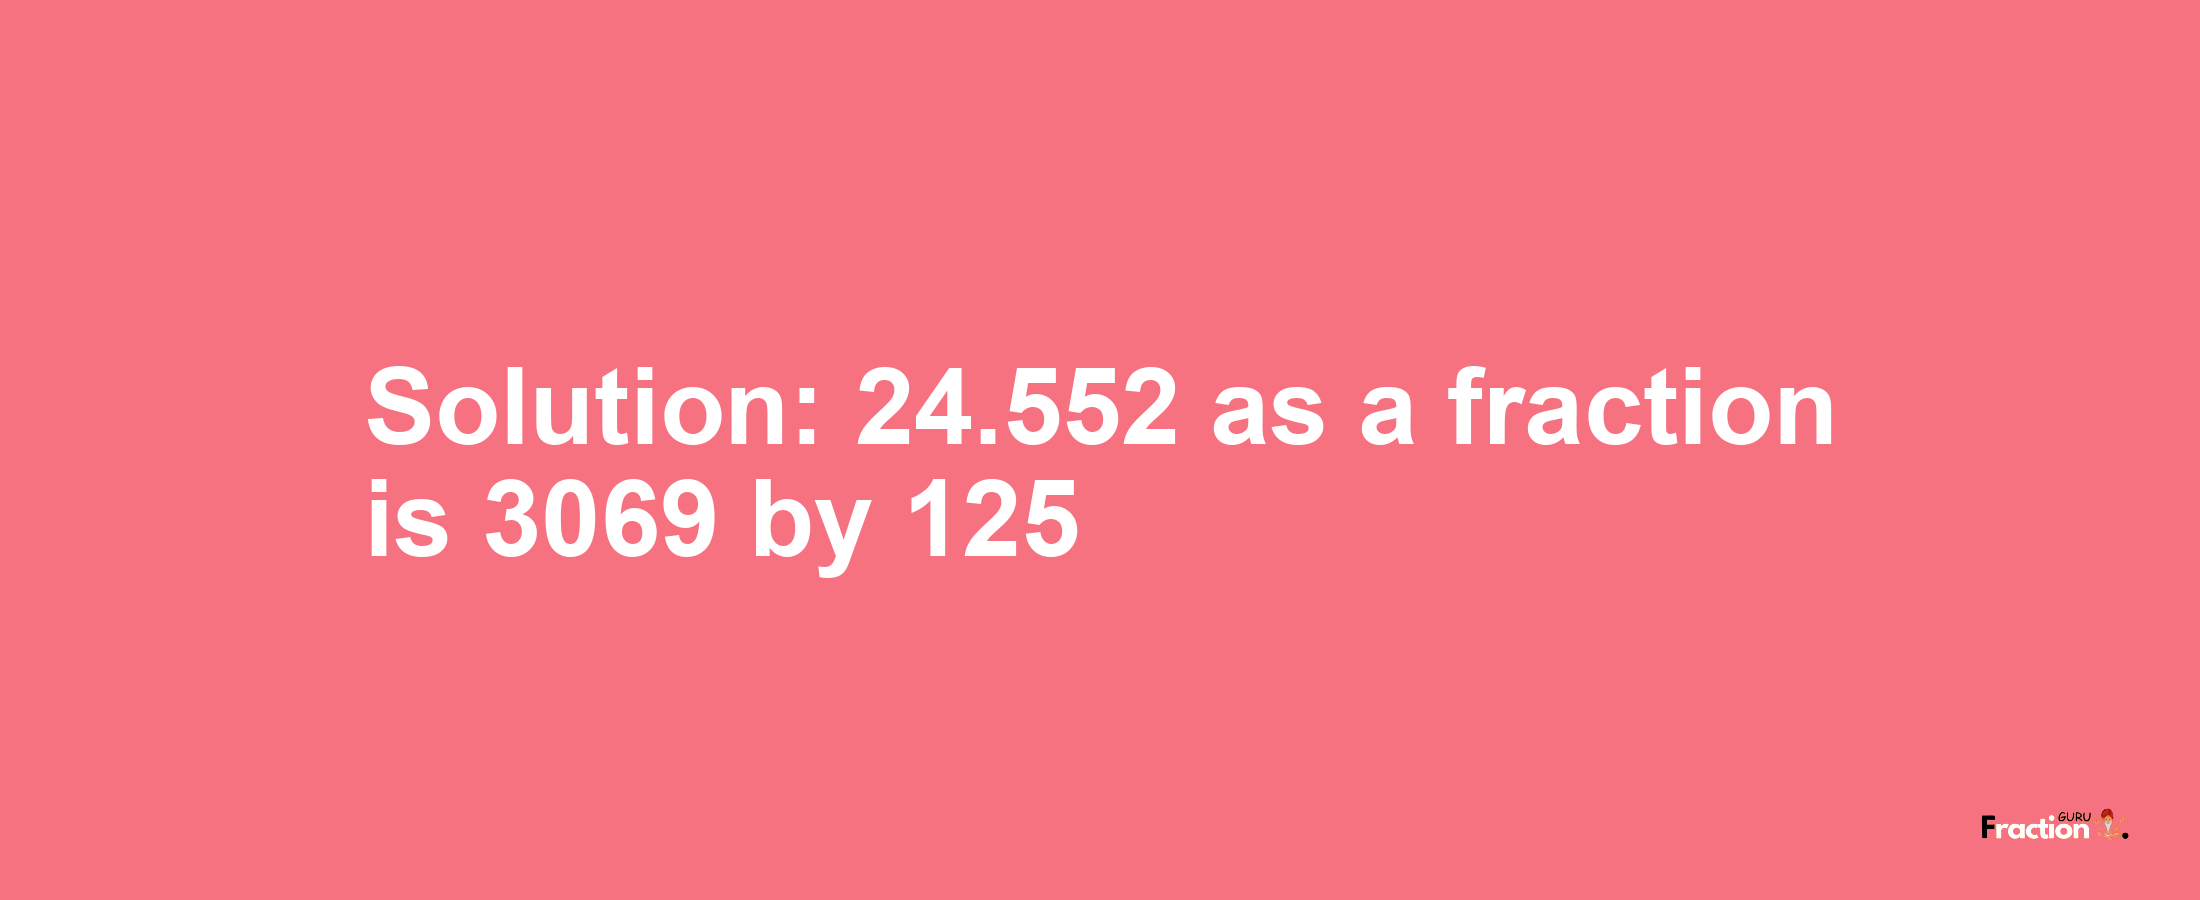 Solution:24.552 as a fraction is 3069/125